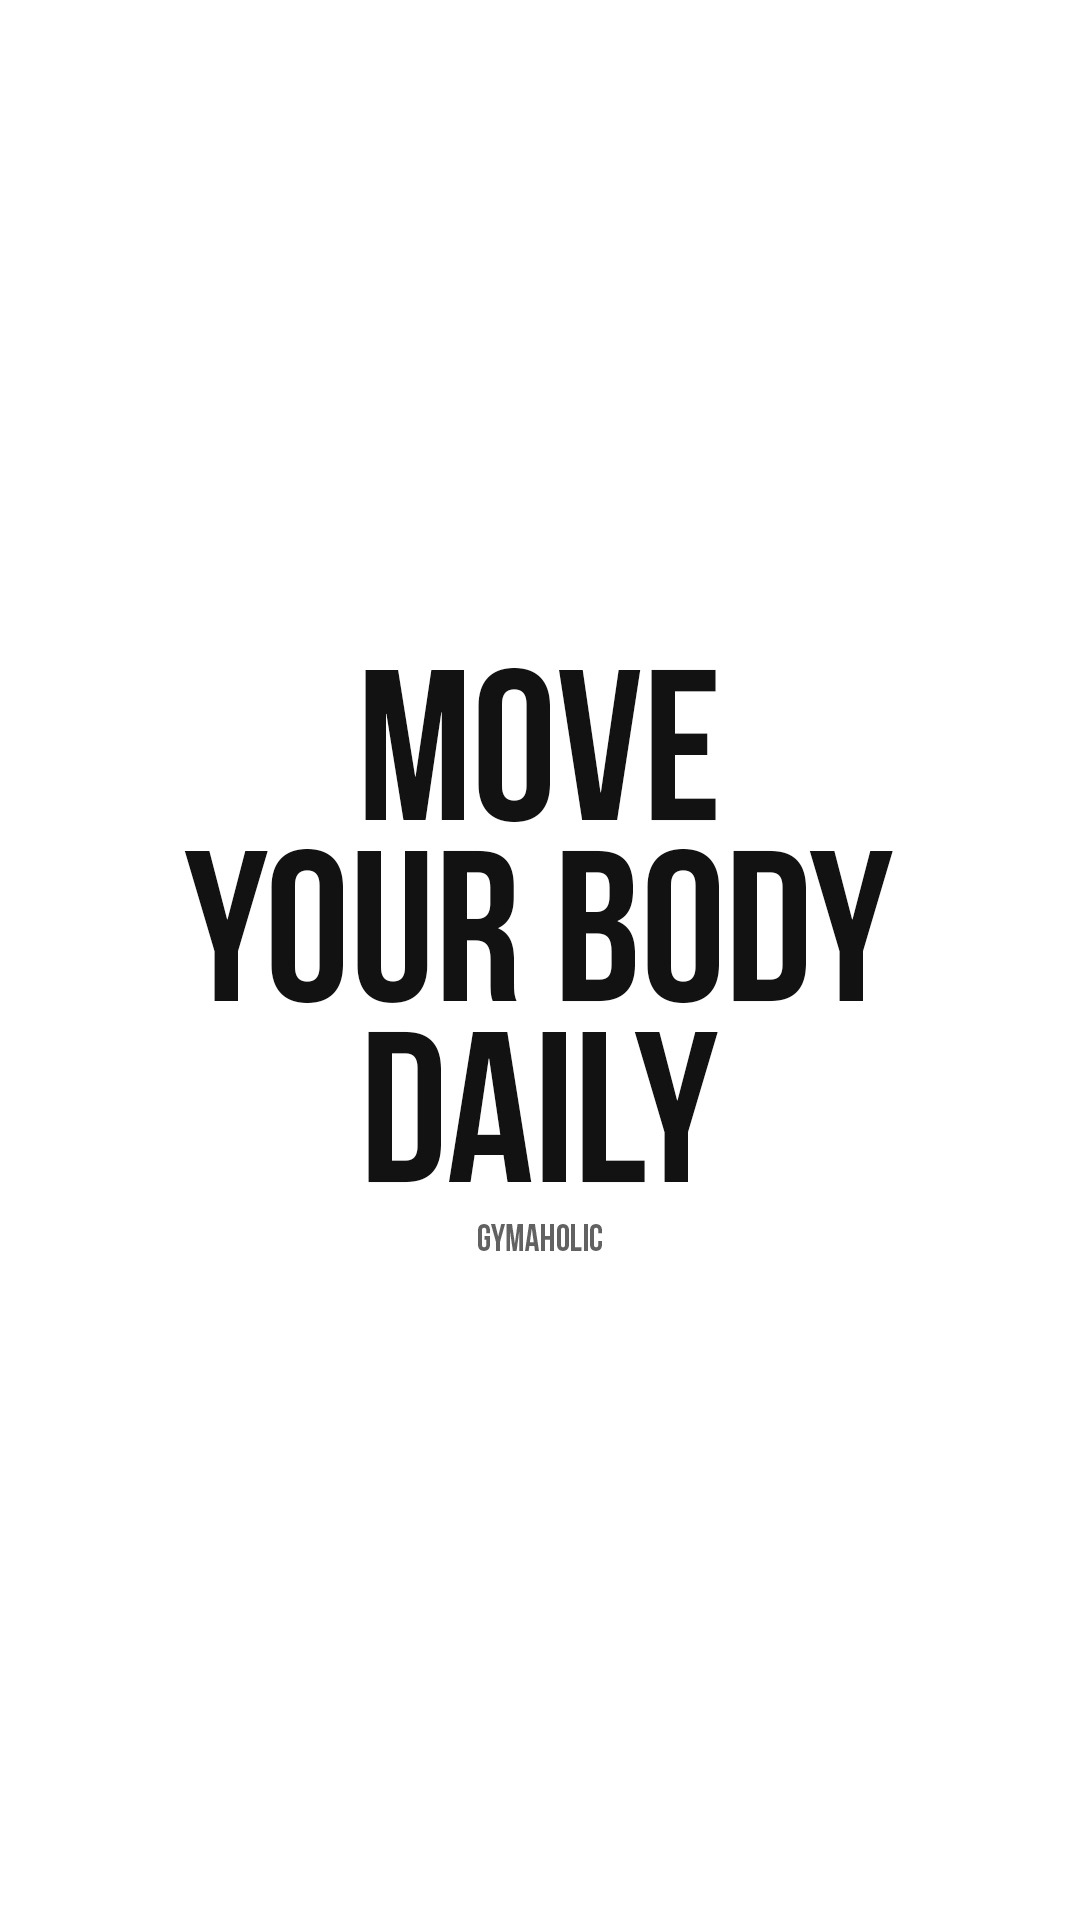 Move your body daily